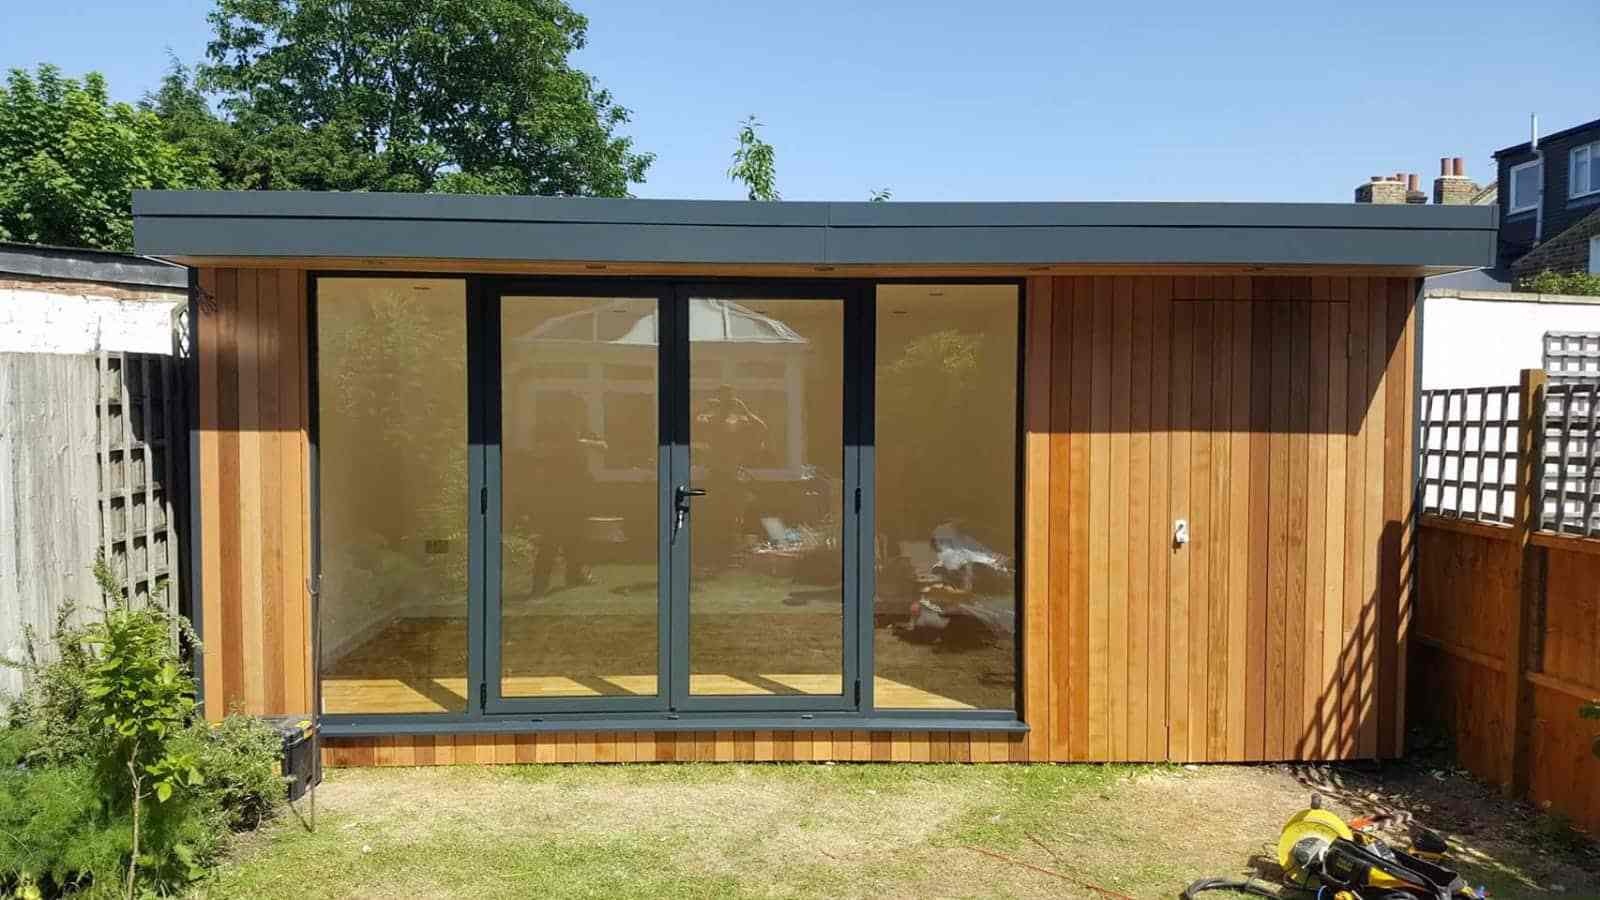 A classic garden room transforms an under-used space in Wimbledon